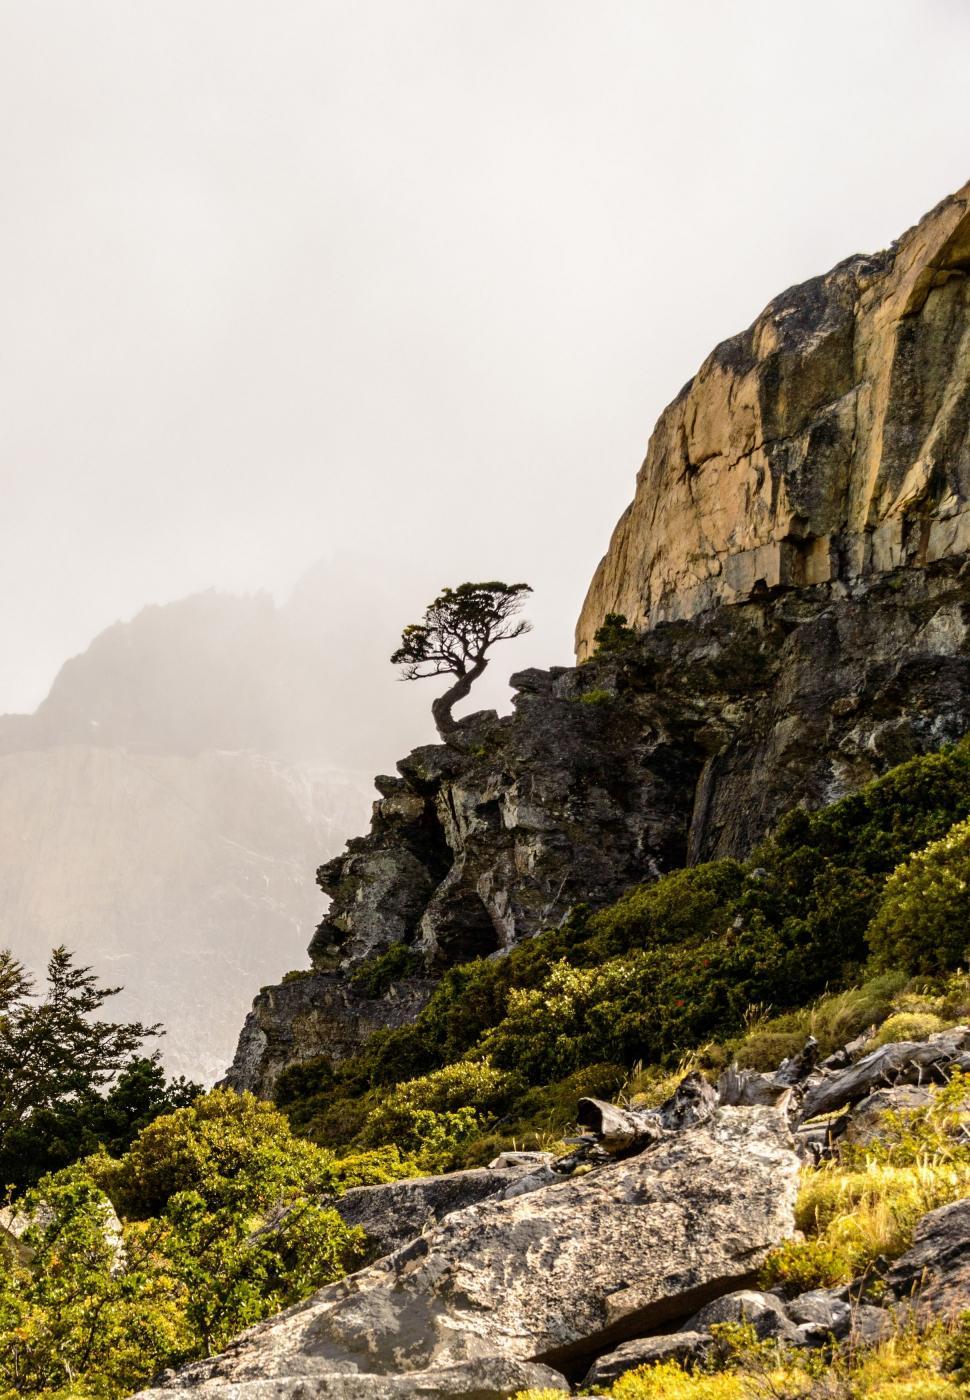 Free Image of Lone Tree Standing on Mountain Slope 